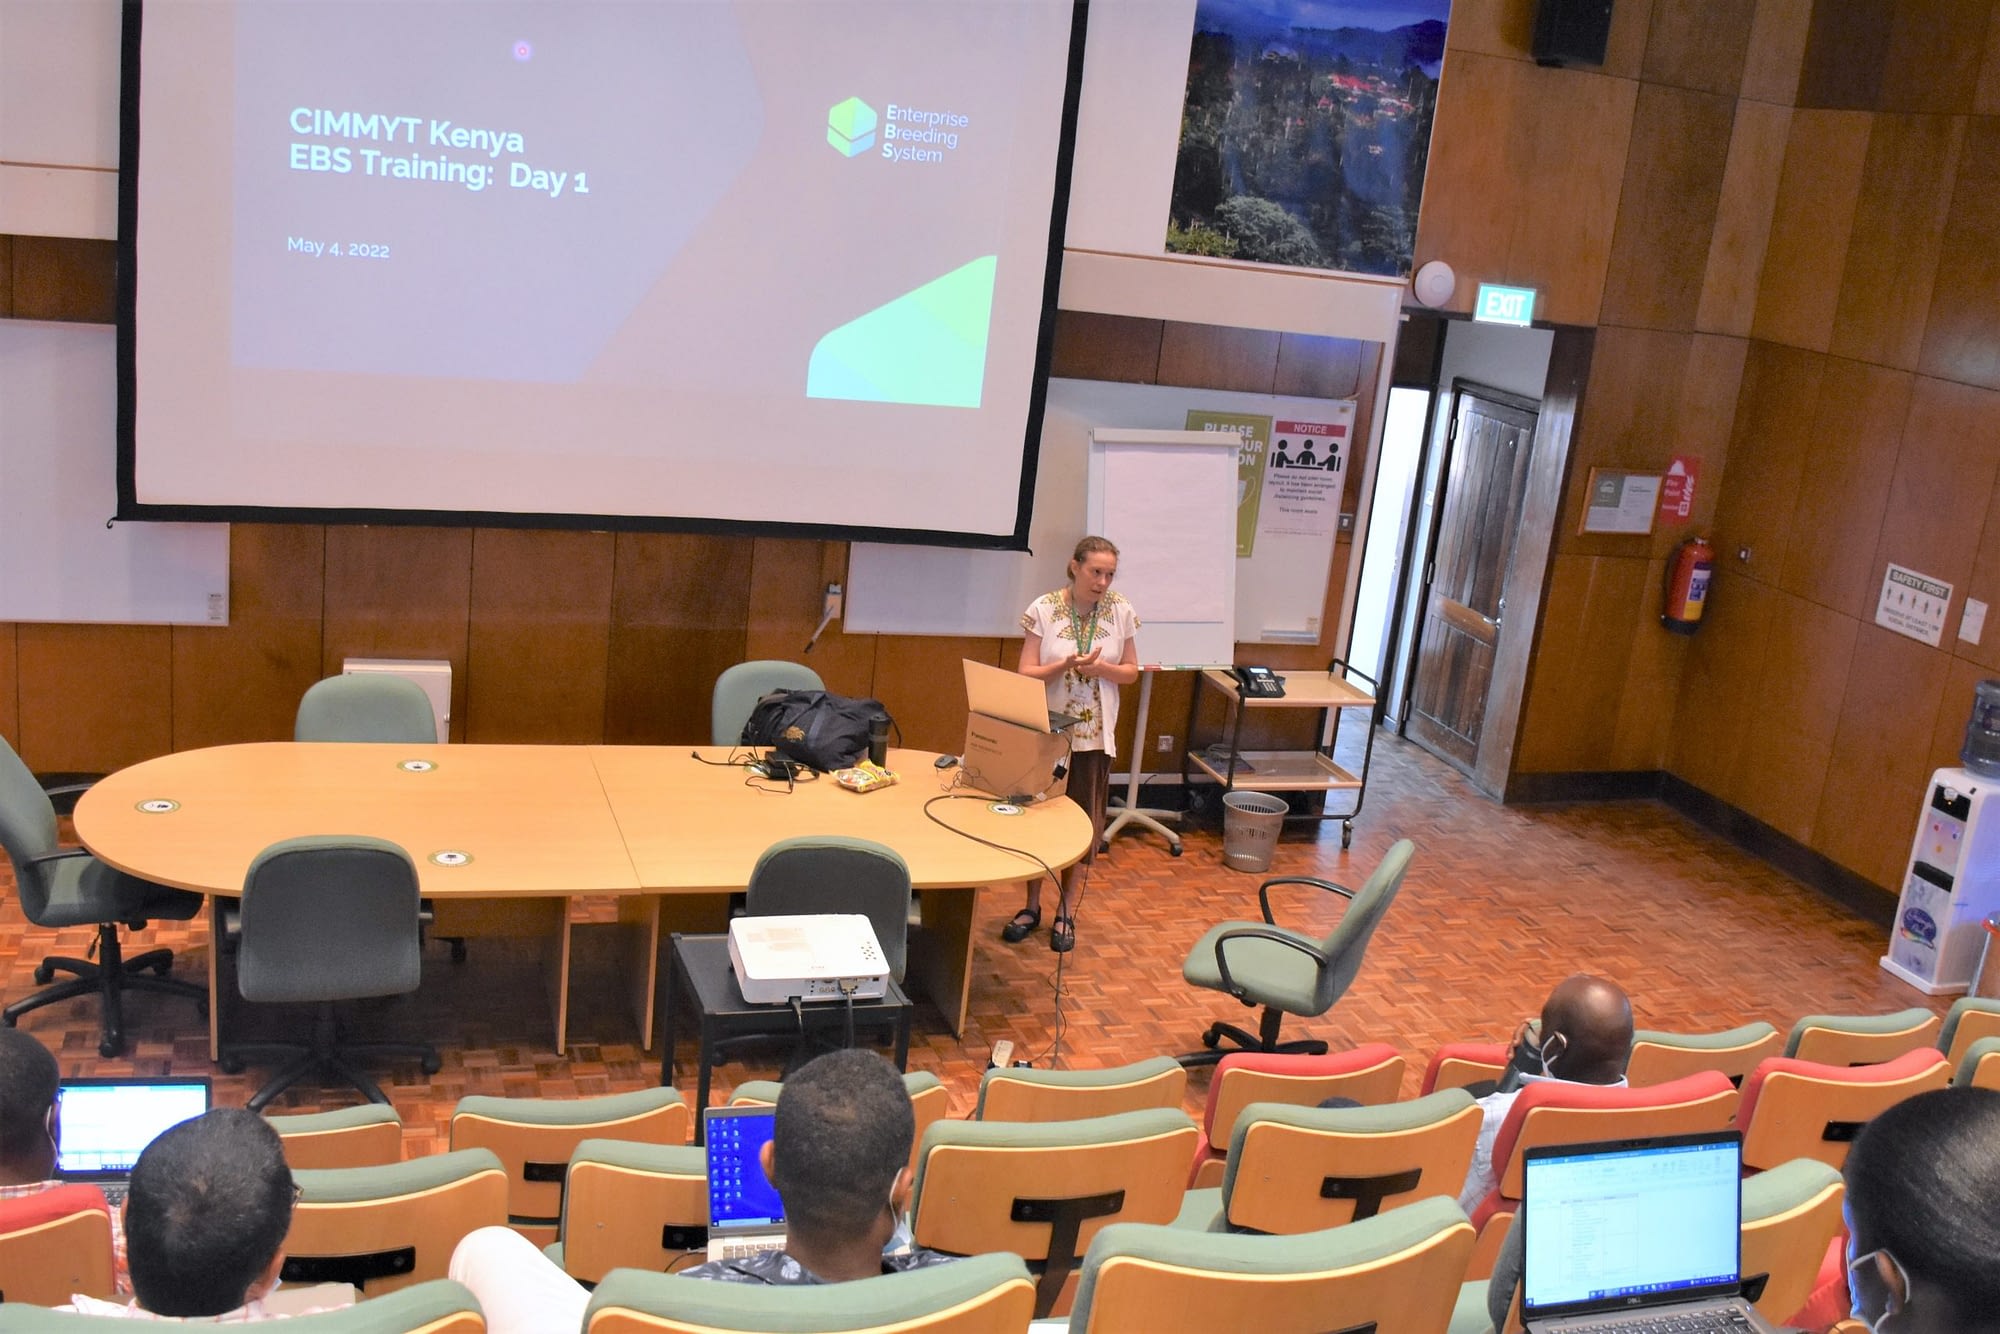 Kate Dreher, Data Manager at CIMMYT, presents to scientists, technicians, data management and support teams during the Enterprise Breeding System (EBS) training in Nairobi, Kenya.  (Photo: Susan Umazi Otieno/CIMMYT)